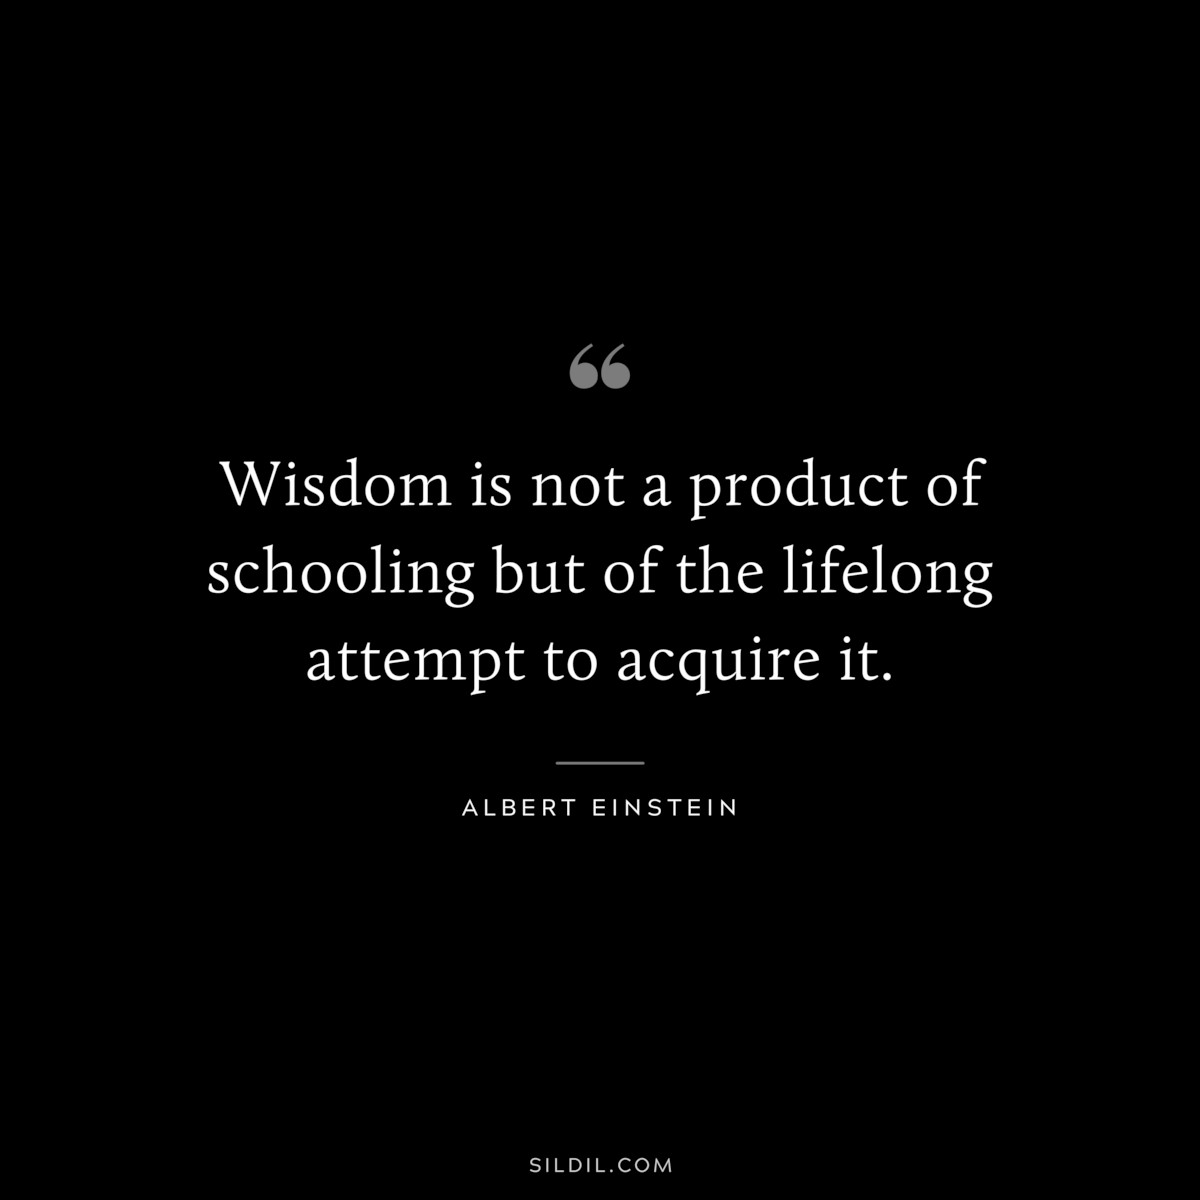 Wisdom is not a product of schooling but of the lifelong attempt to acquire it. ― Albert Einstein